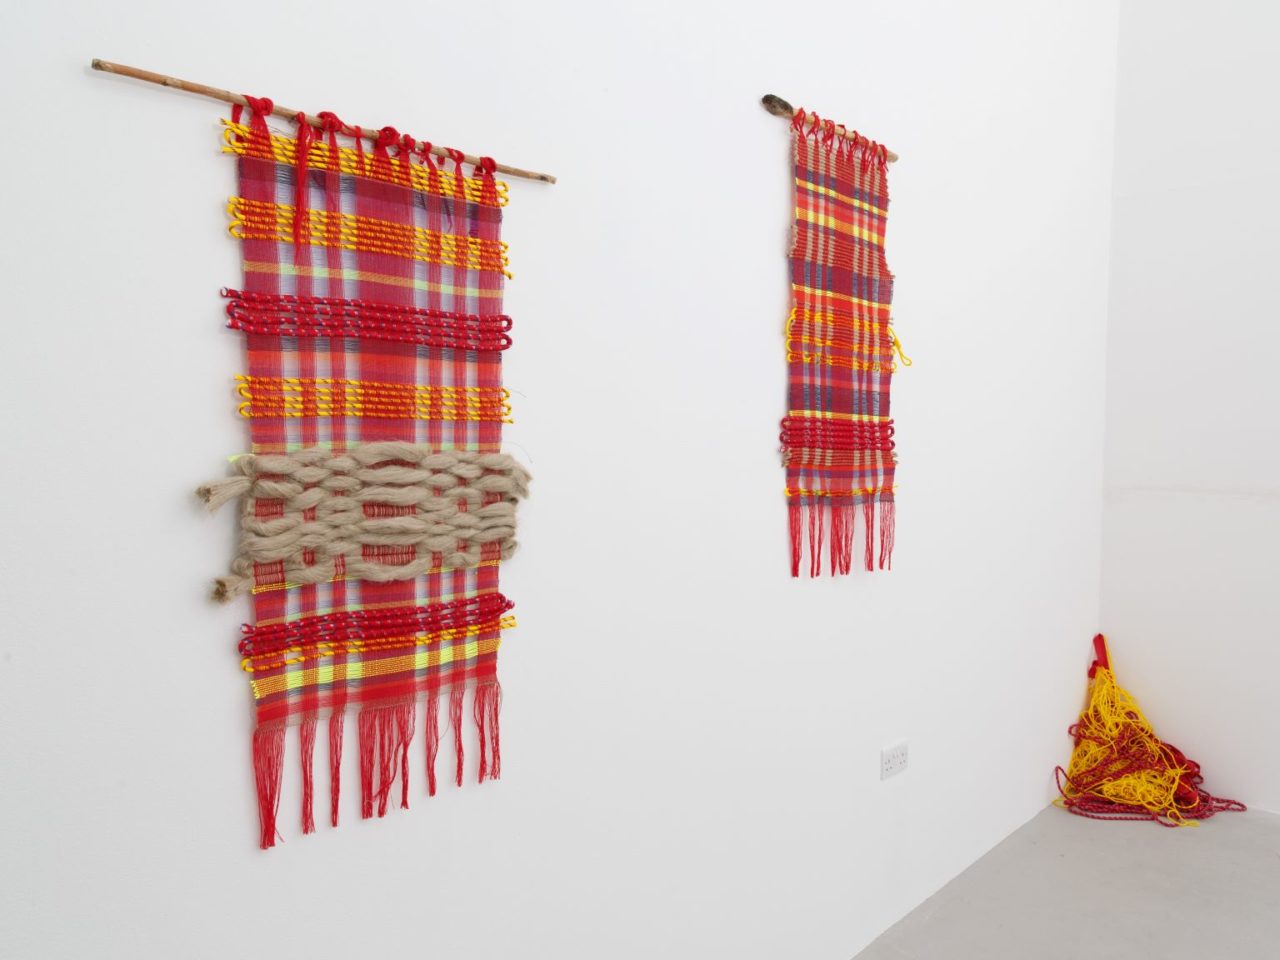 Two textile tapestries, hanging on a wall, they are red with hints of yellow and blue. In the corner of the room is a pile of lose thread coloured red and yellow.